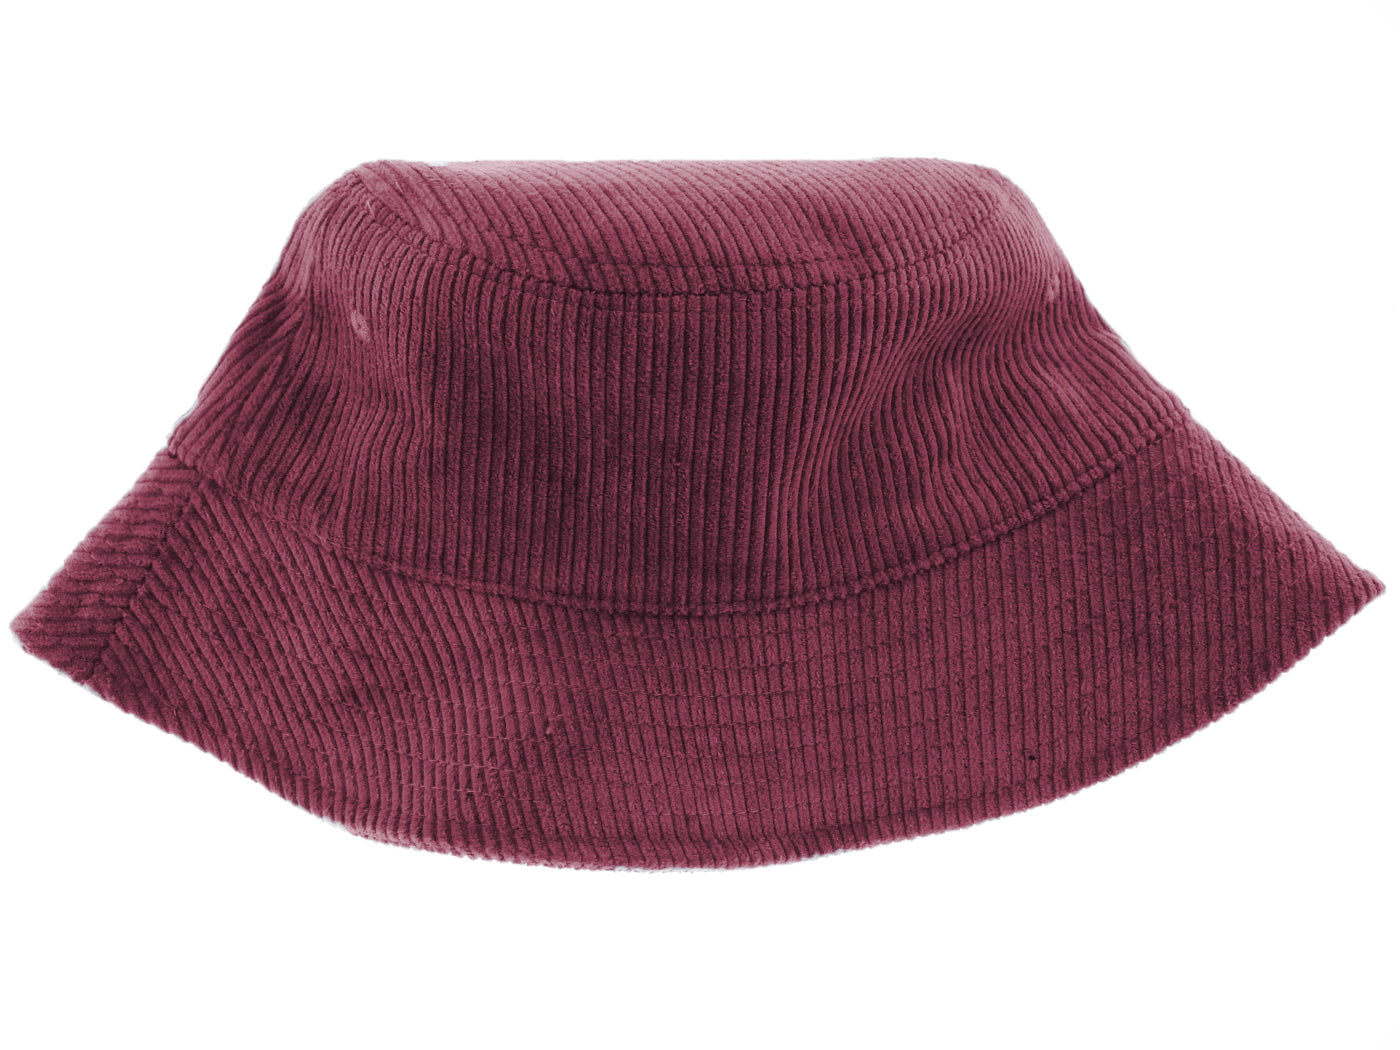 Corduroy Bucket Hat Lightweight Casual Solid Color Unisex Cotton Fishing Hat